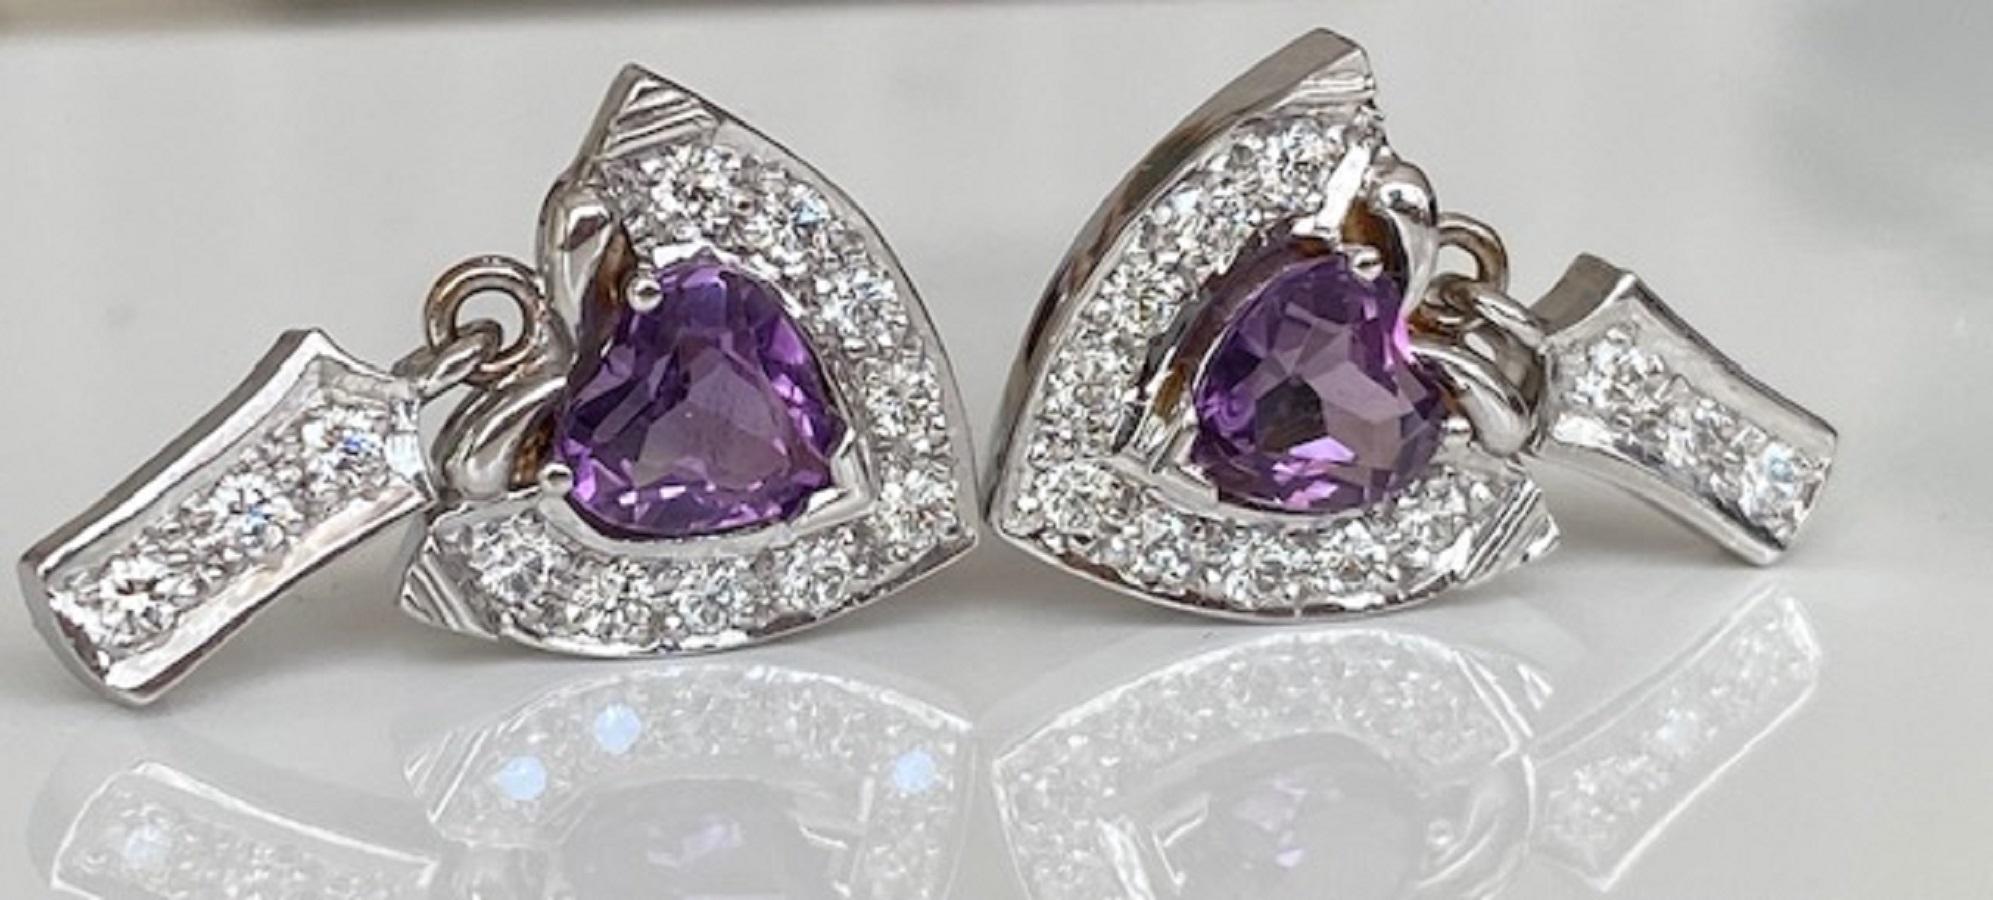 Vintage 18 kt white gold Diamond Dangle earrings studs with Amethyst For Sale 2